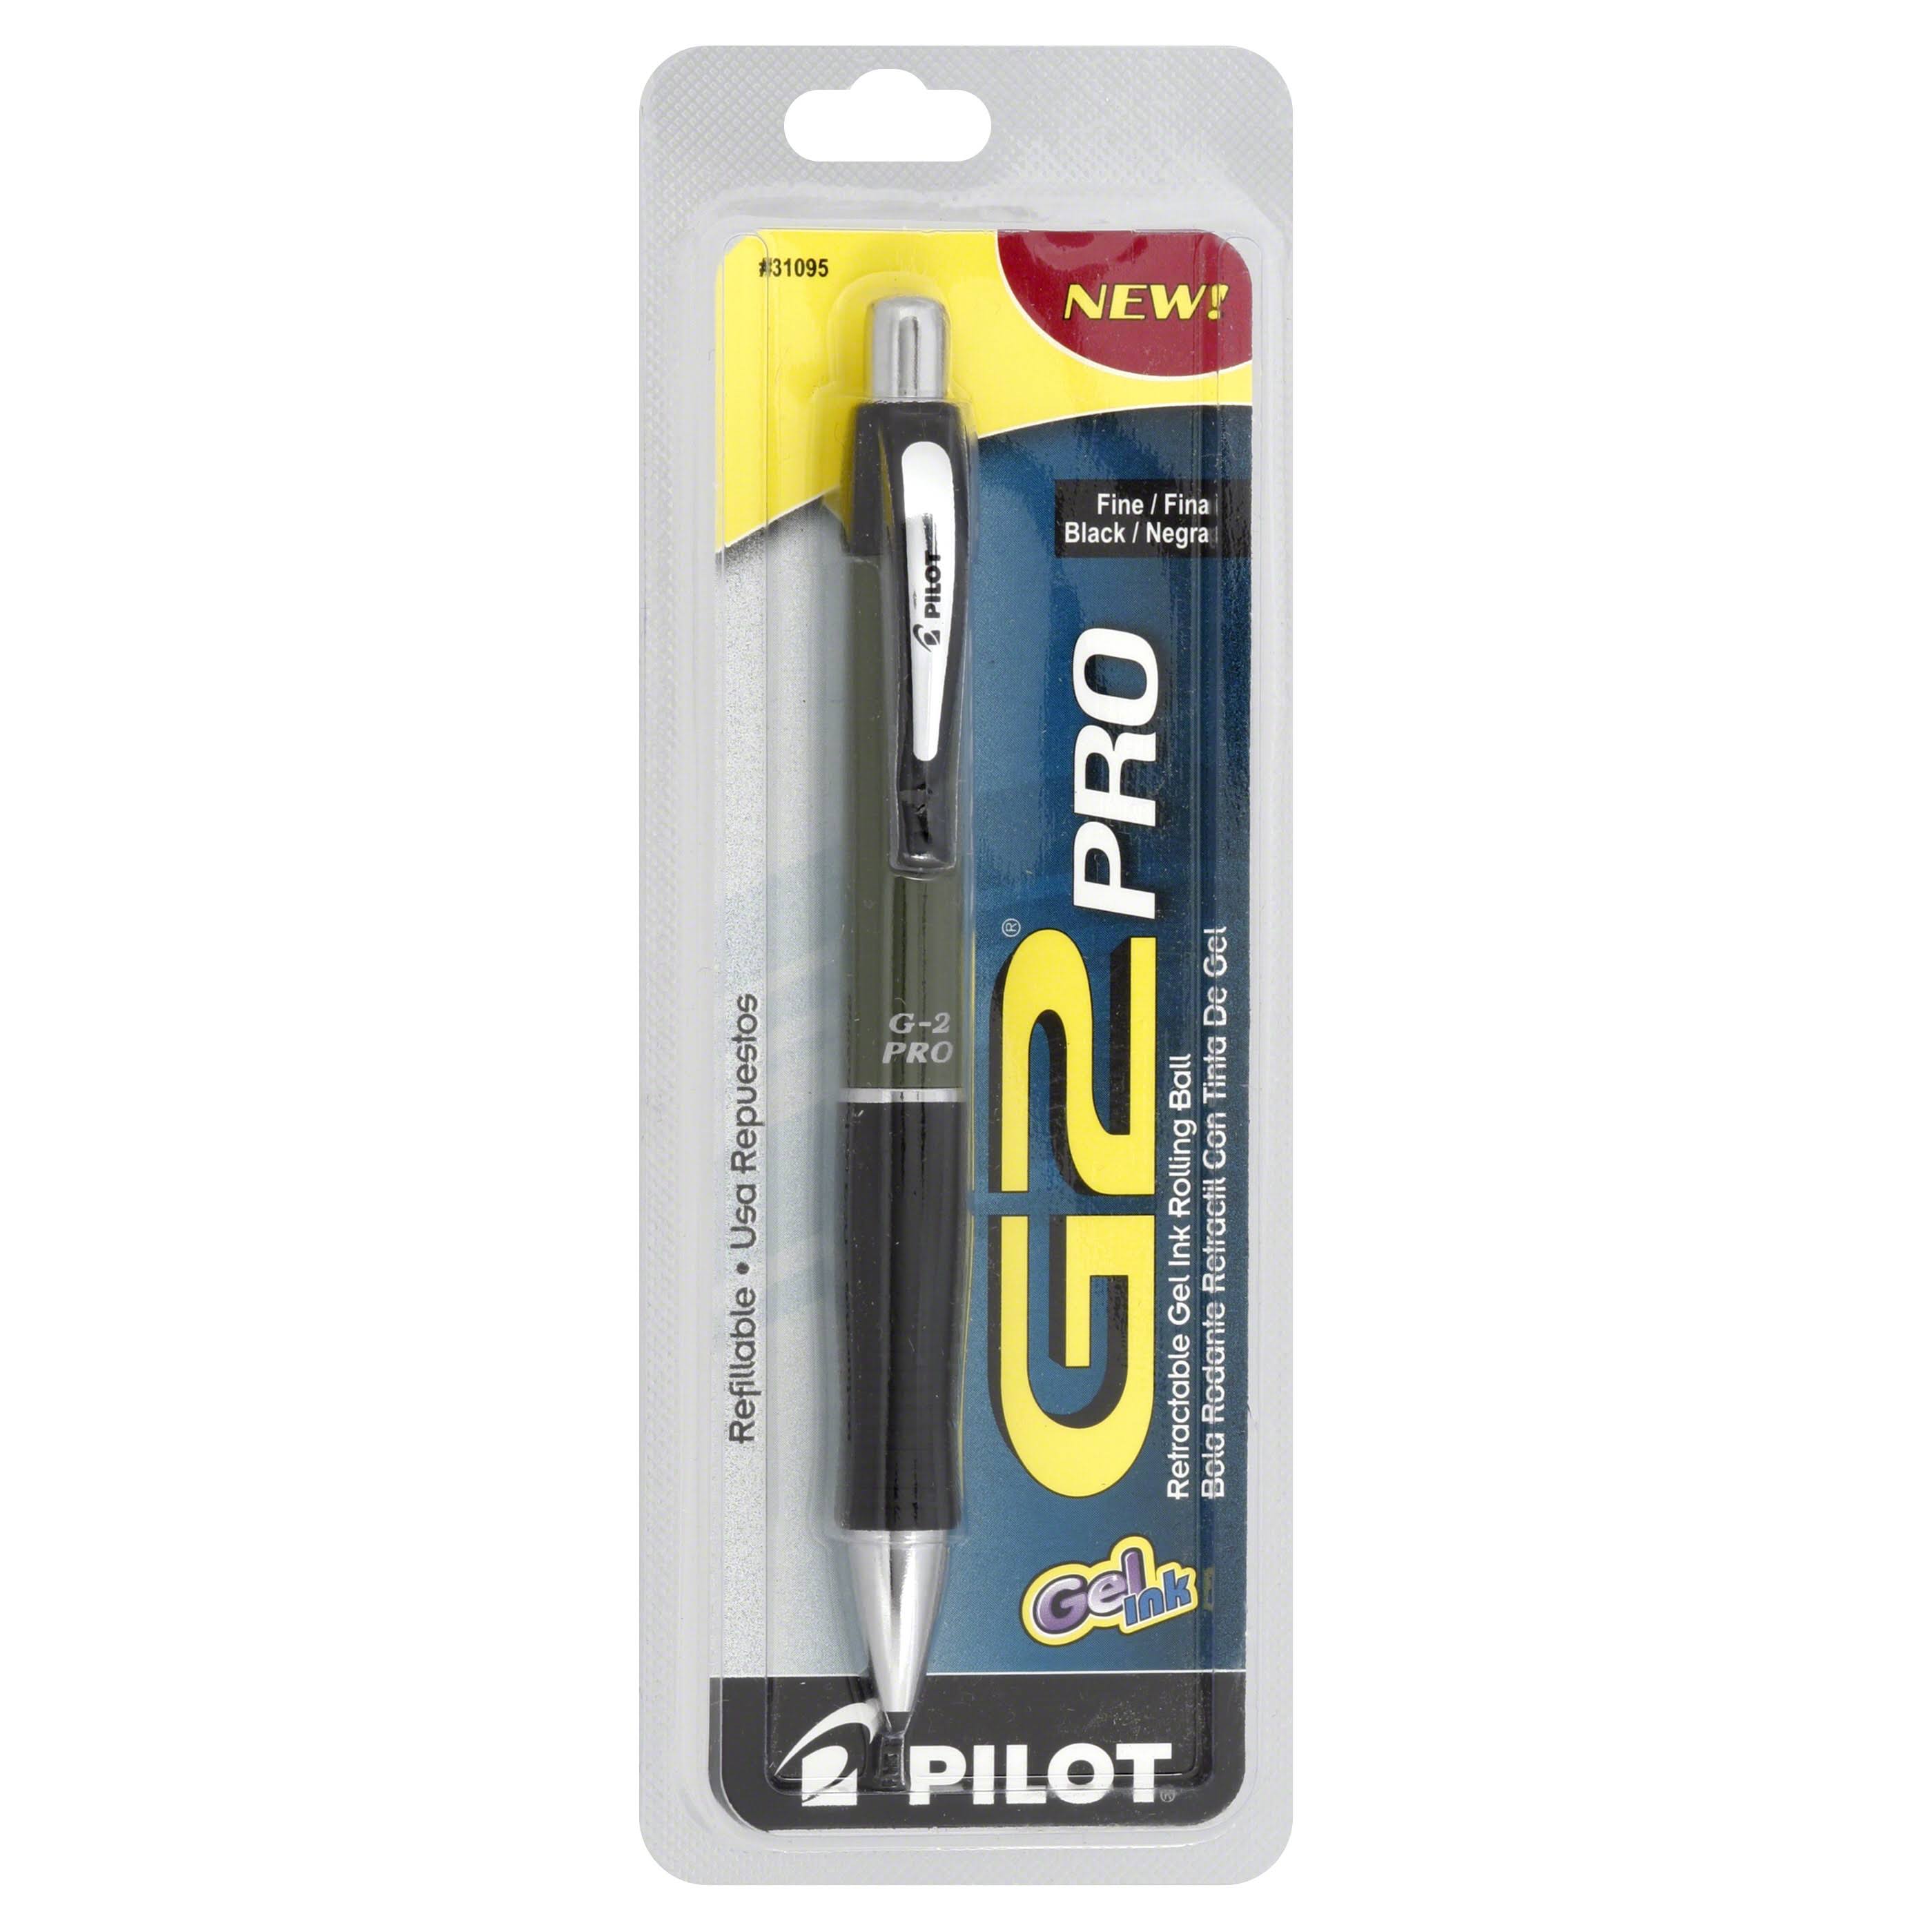 Pilot 31095 G2 Pro Retractable Gel Ink Rolling Ball Pen - Fine Point, Barrel,Color May Vary with Black Ink